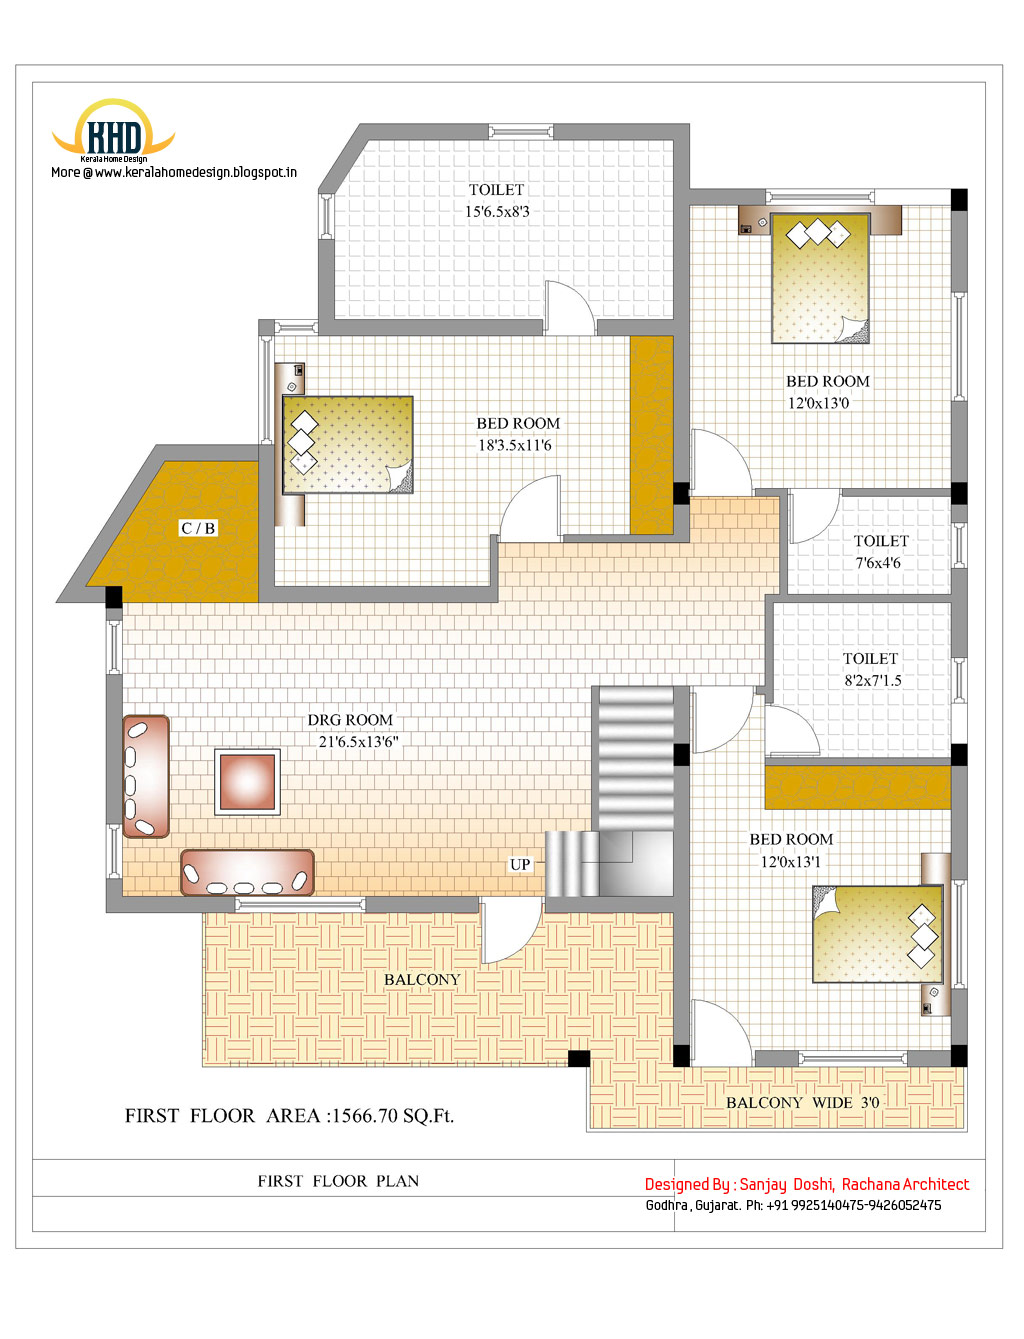 3 Story House Plan and Elevation 3521 Sq. Ft. Kerala